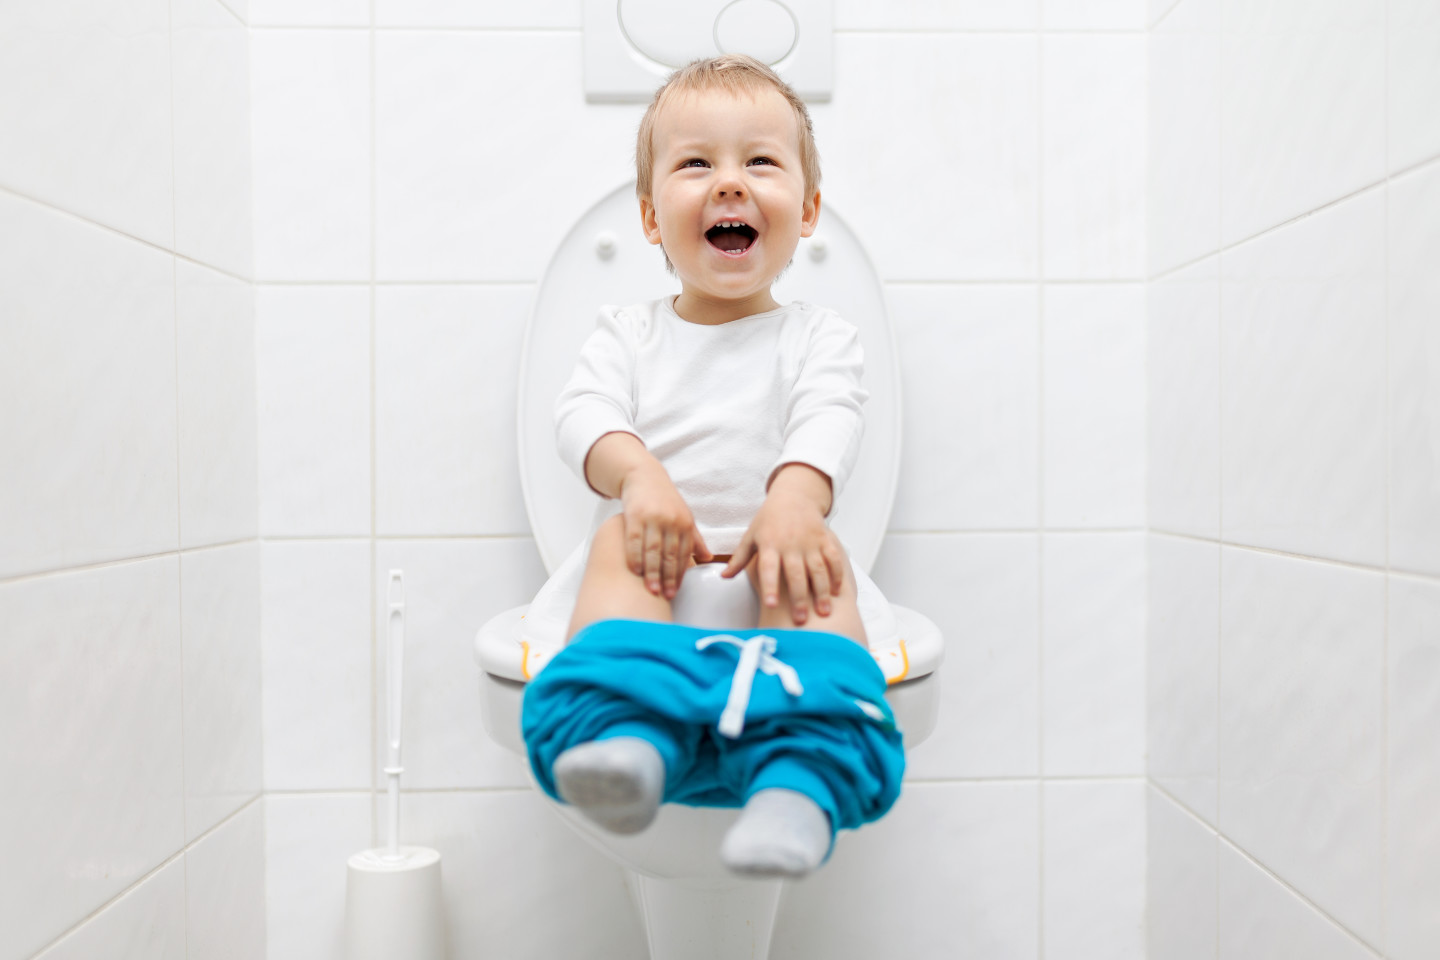 How To Potty Train Girls - Training Tips For Toddler